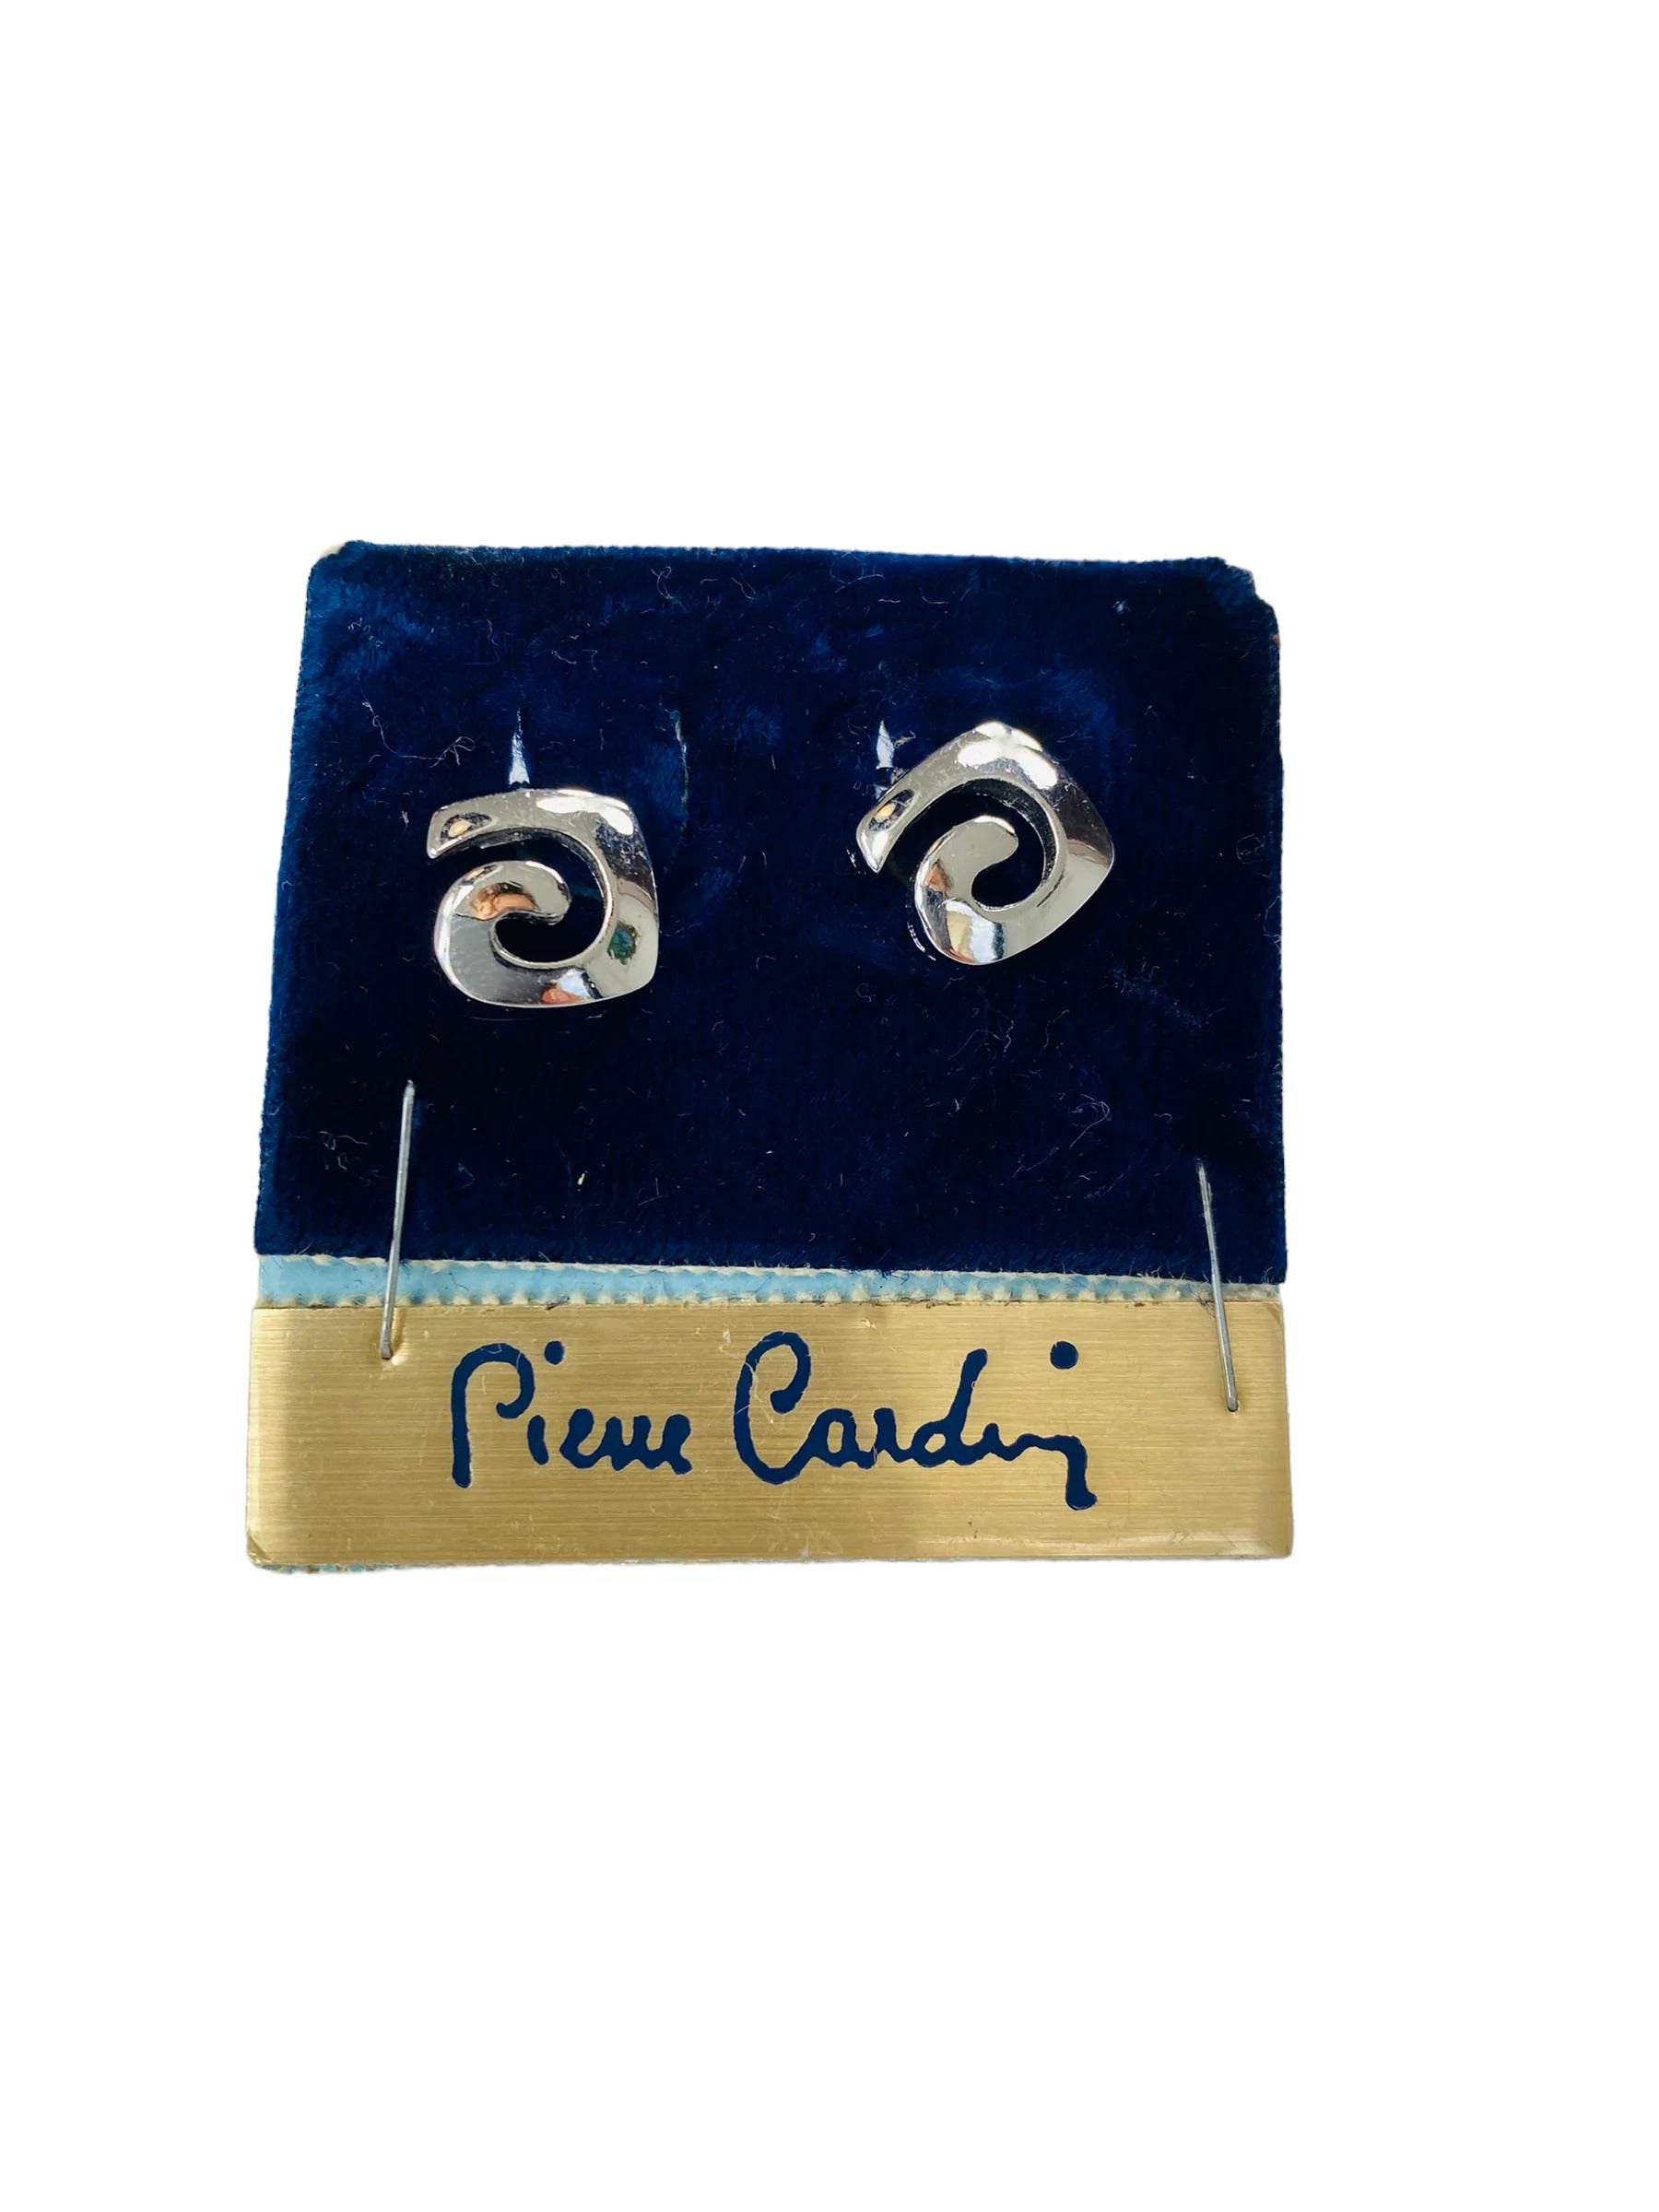 Pierre Cardin Vintage Silver Plated Clip on Earrings, 1980s

Super cute silver plated clip on earrings from the French fashion pioneer Pierre Cardin. Made in France in the early 1980s.

By the 1970s, Pierre Cardin was regarded among one of the top